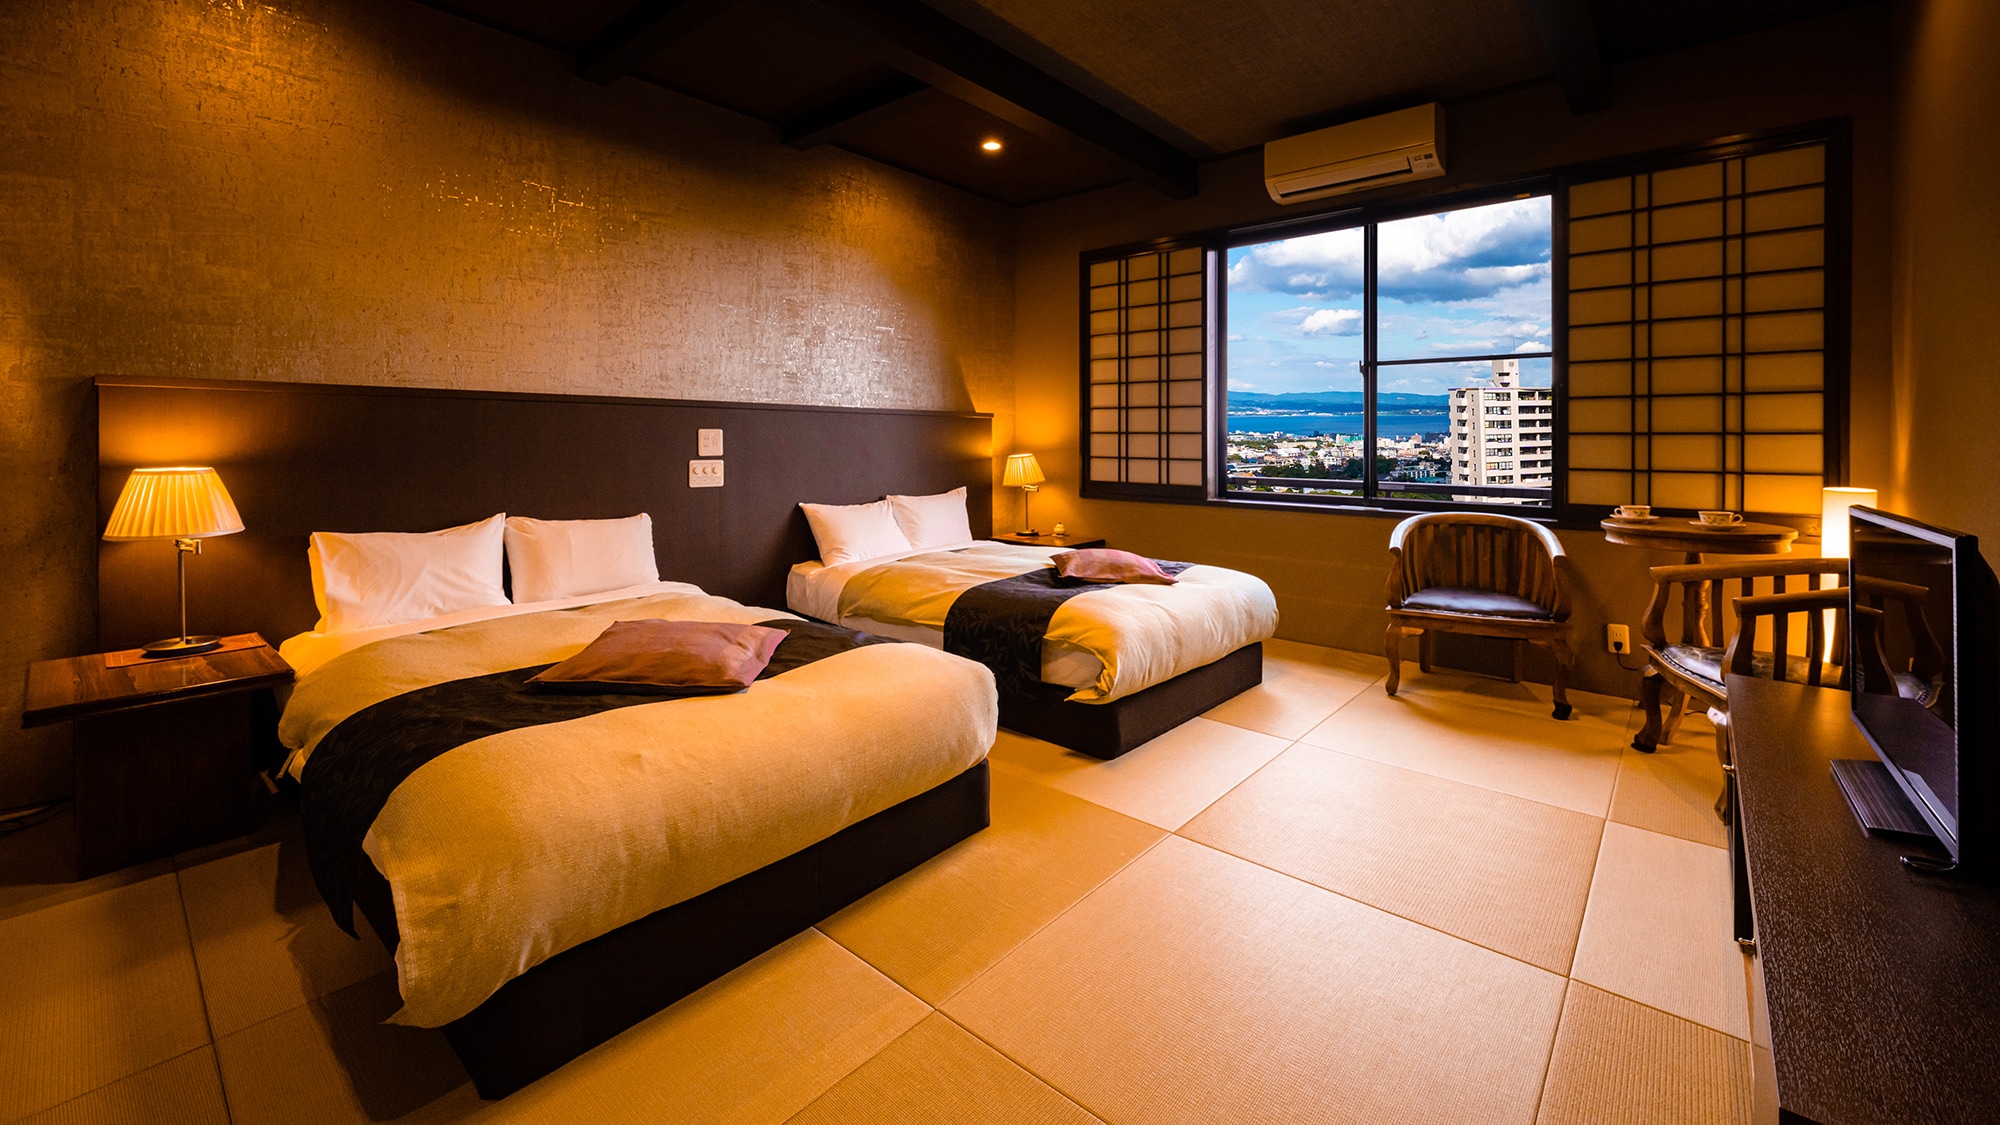 ◆ Oka no Sou ◇ Western-style Japanese-style room ◆ A room with two beds while taking advantage of the Japanese taste